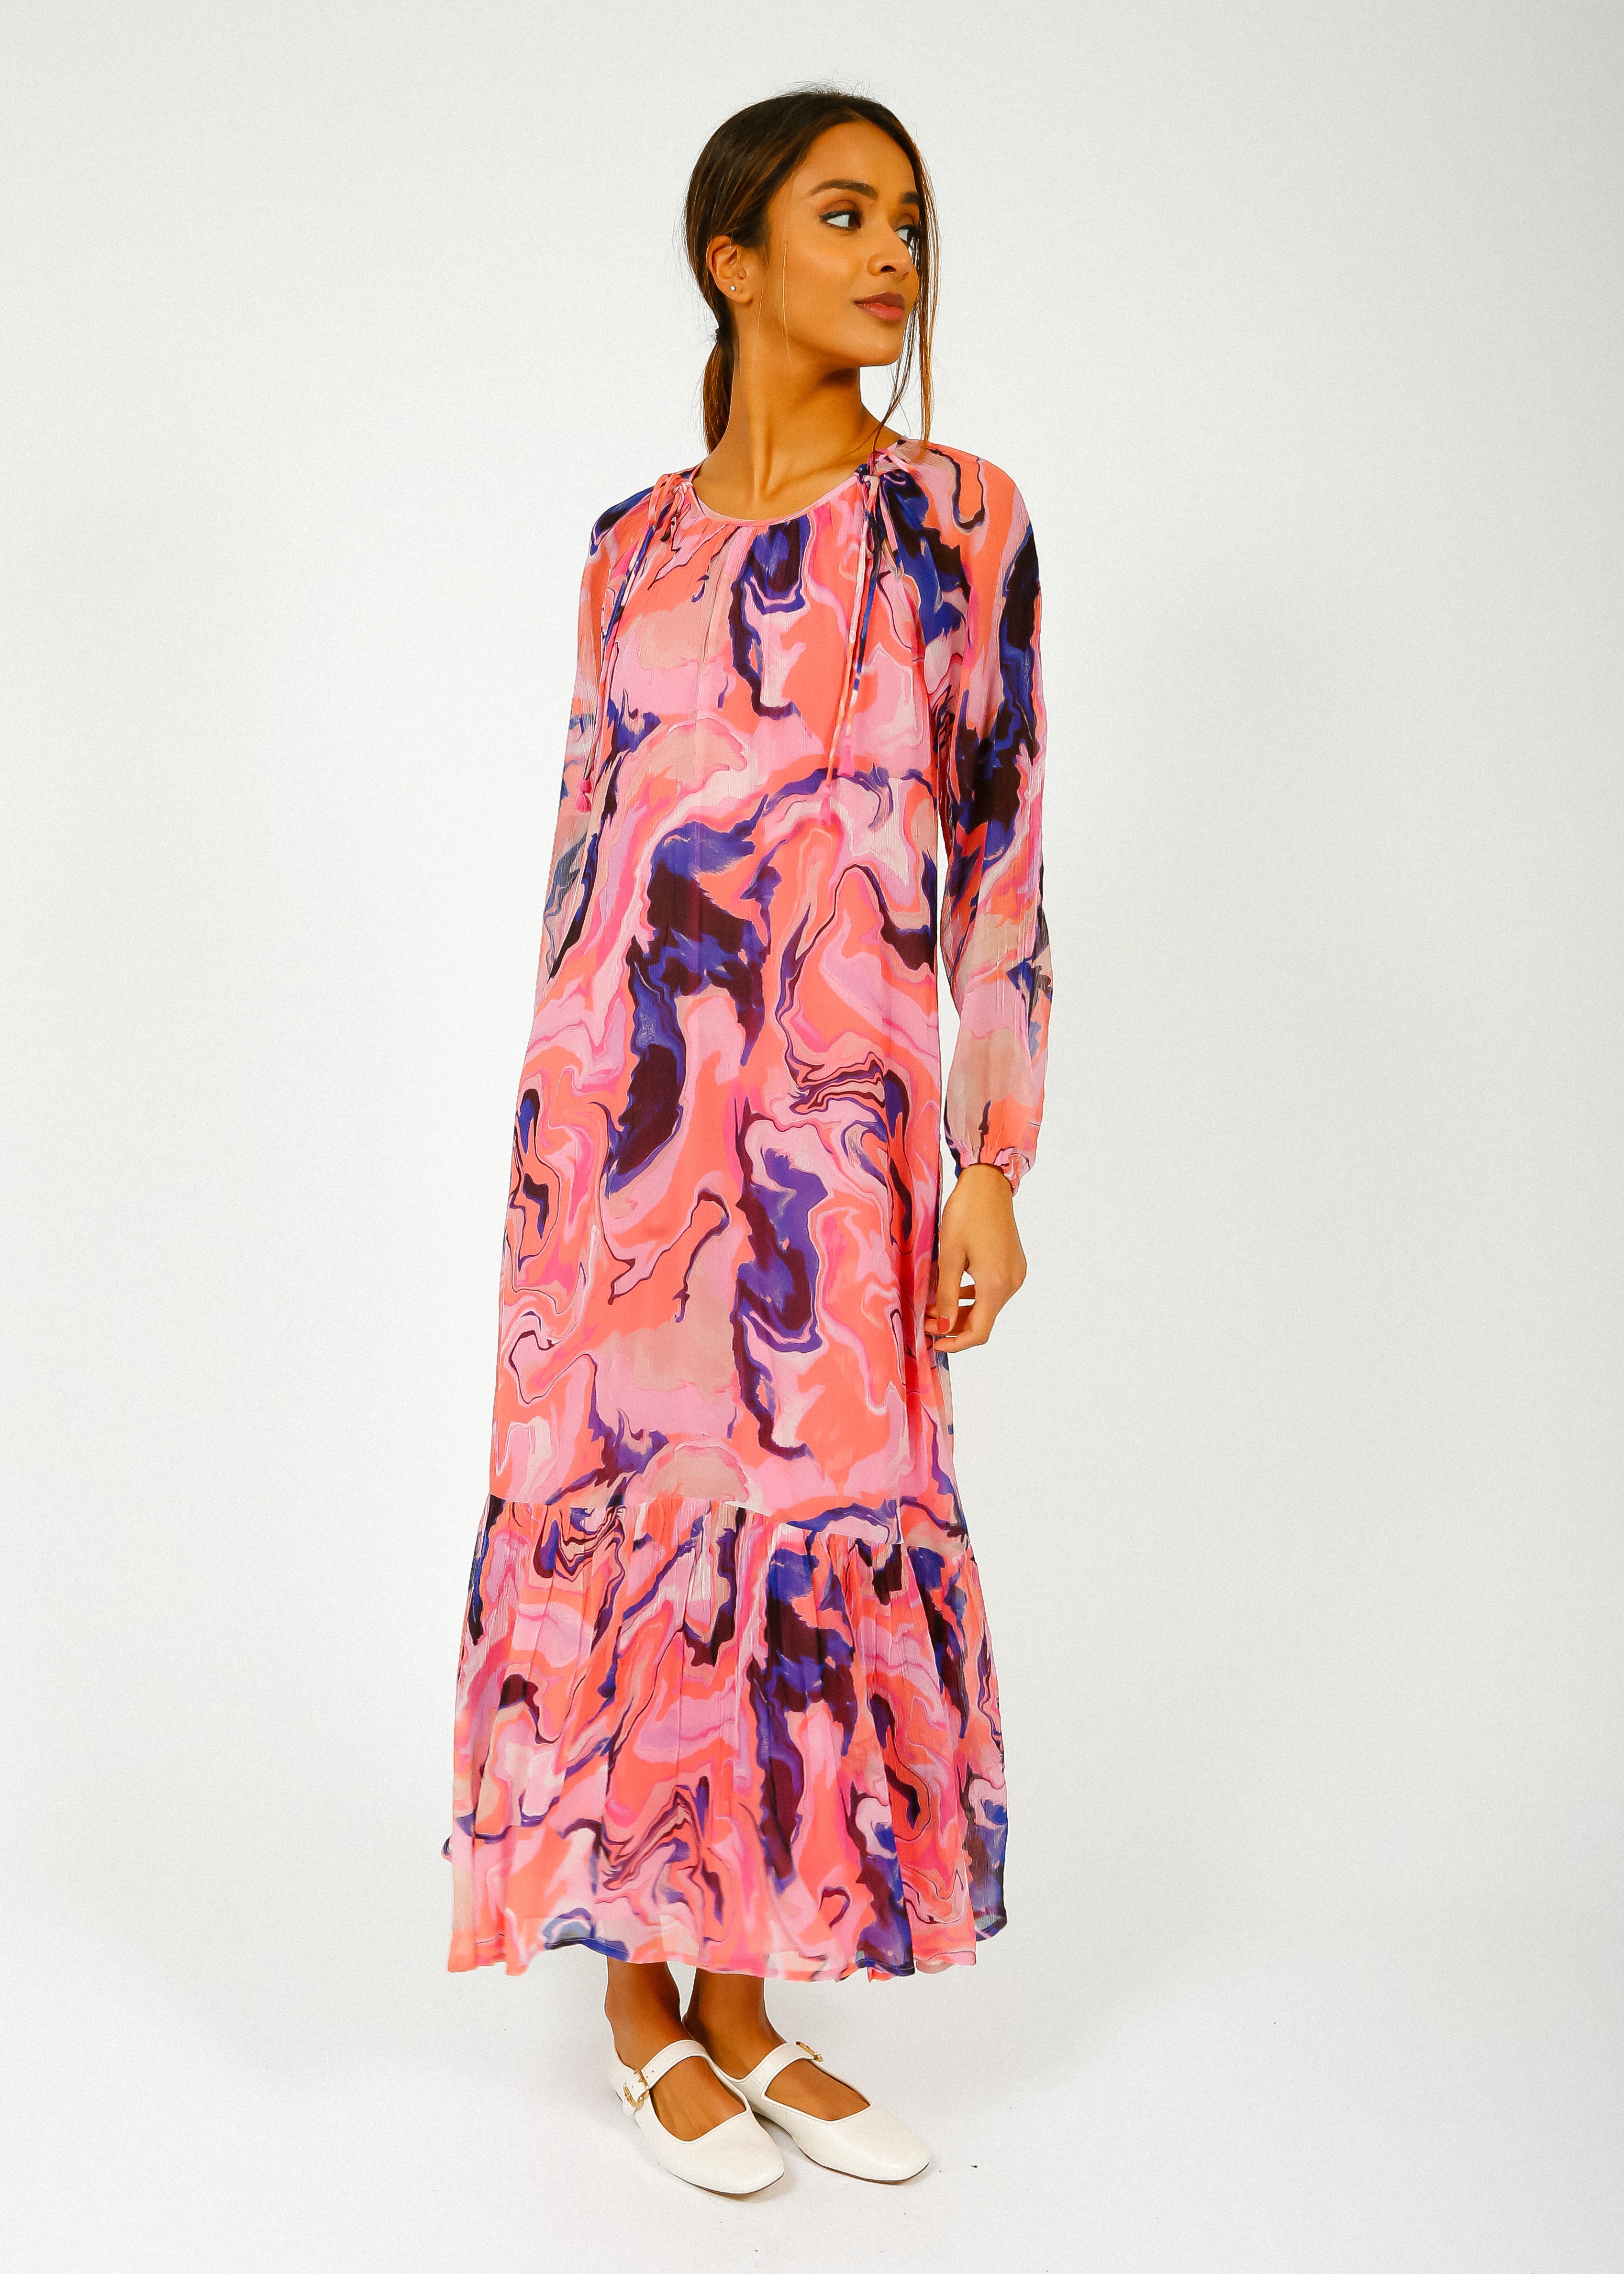 MOLIIN Willow Dress in Coral Almond